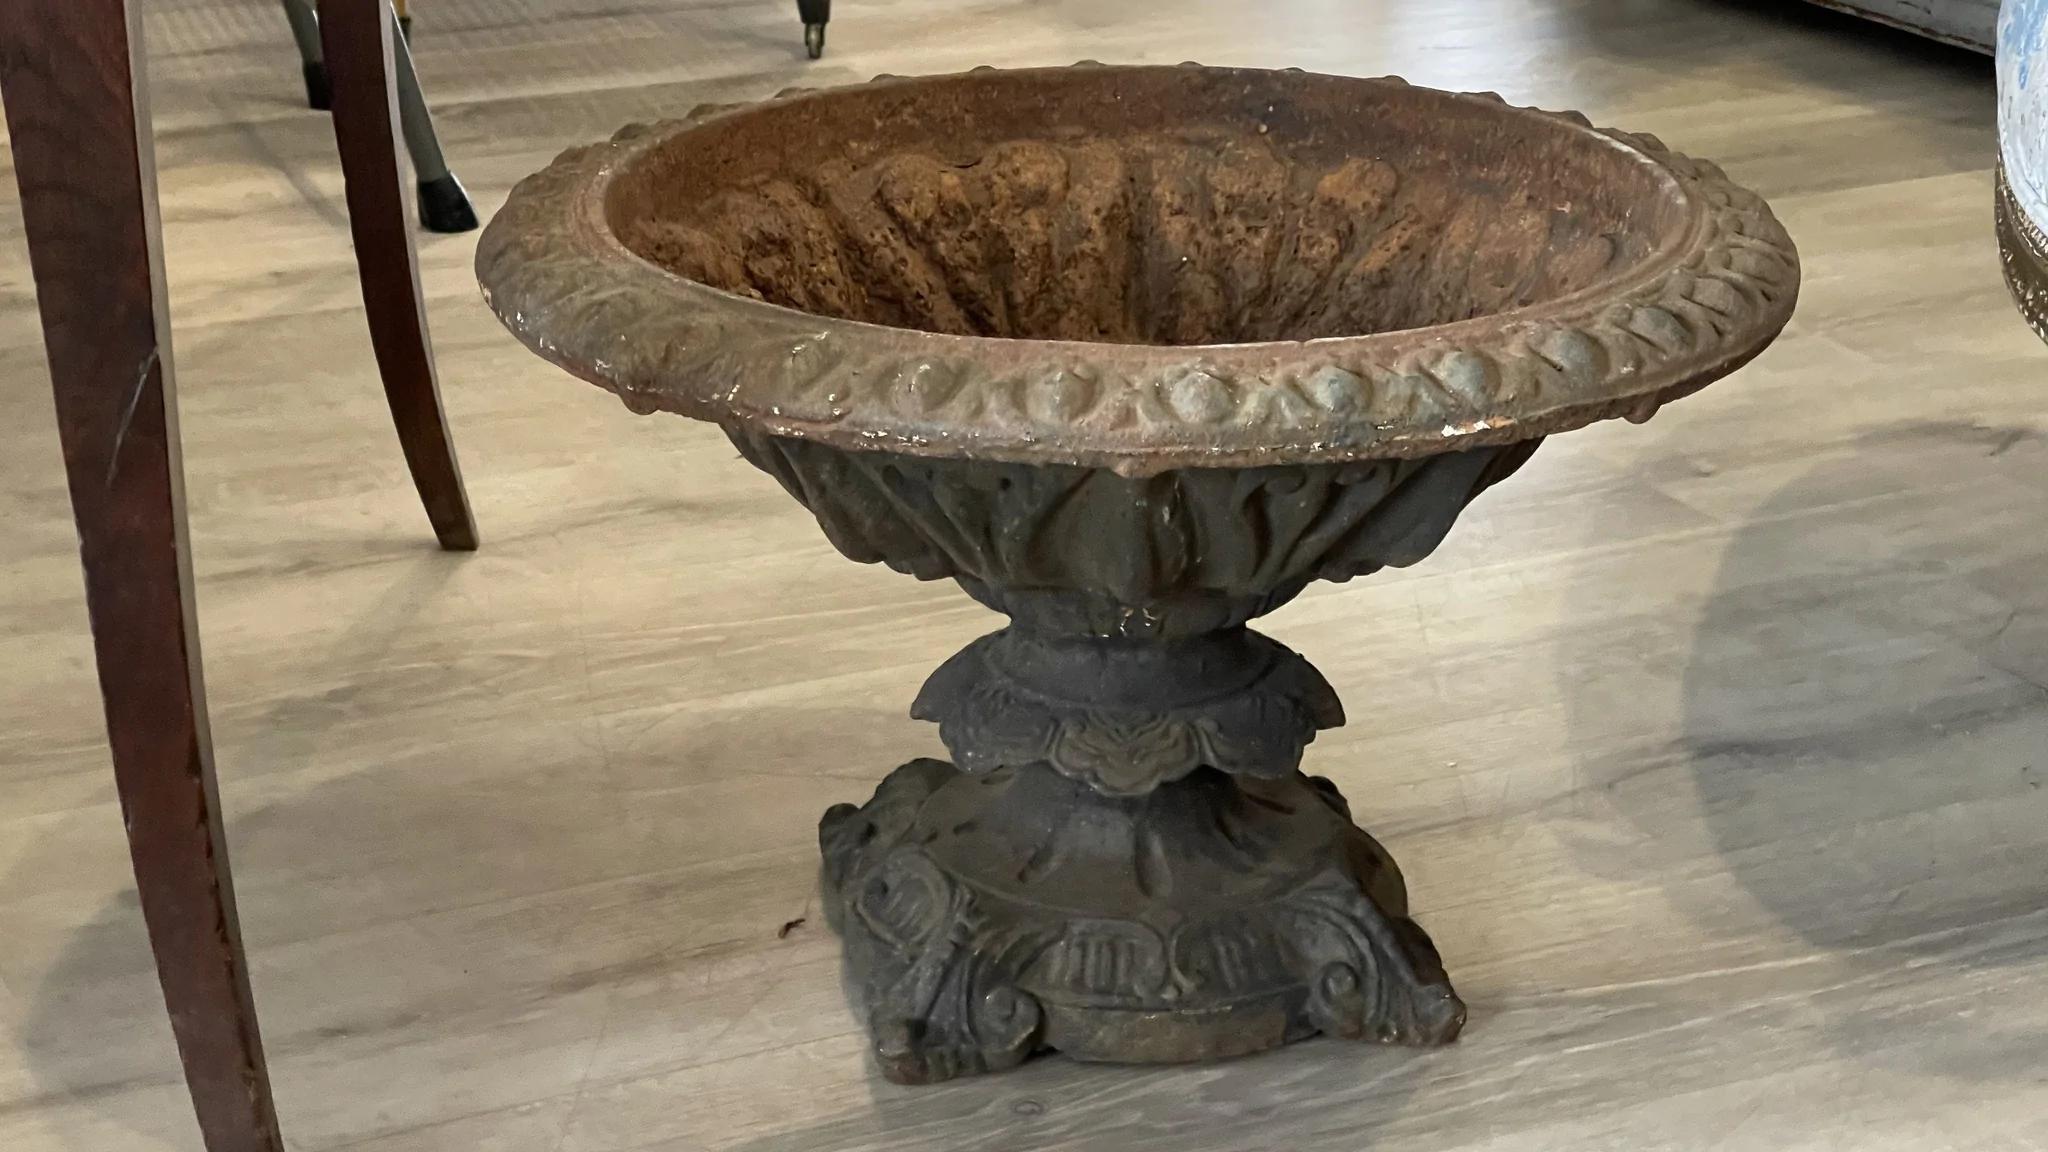 19th Century Cast iron planter urn form with fine foliate detail throughout.

